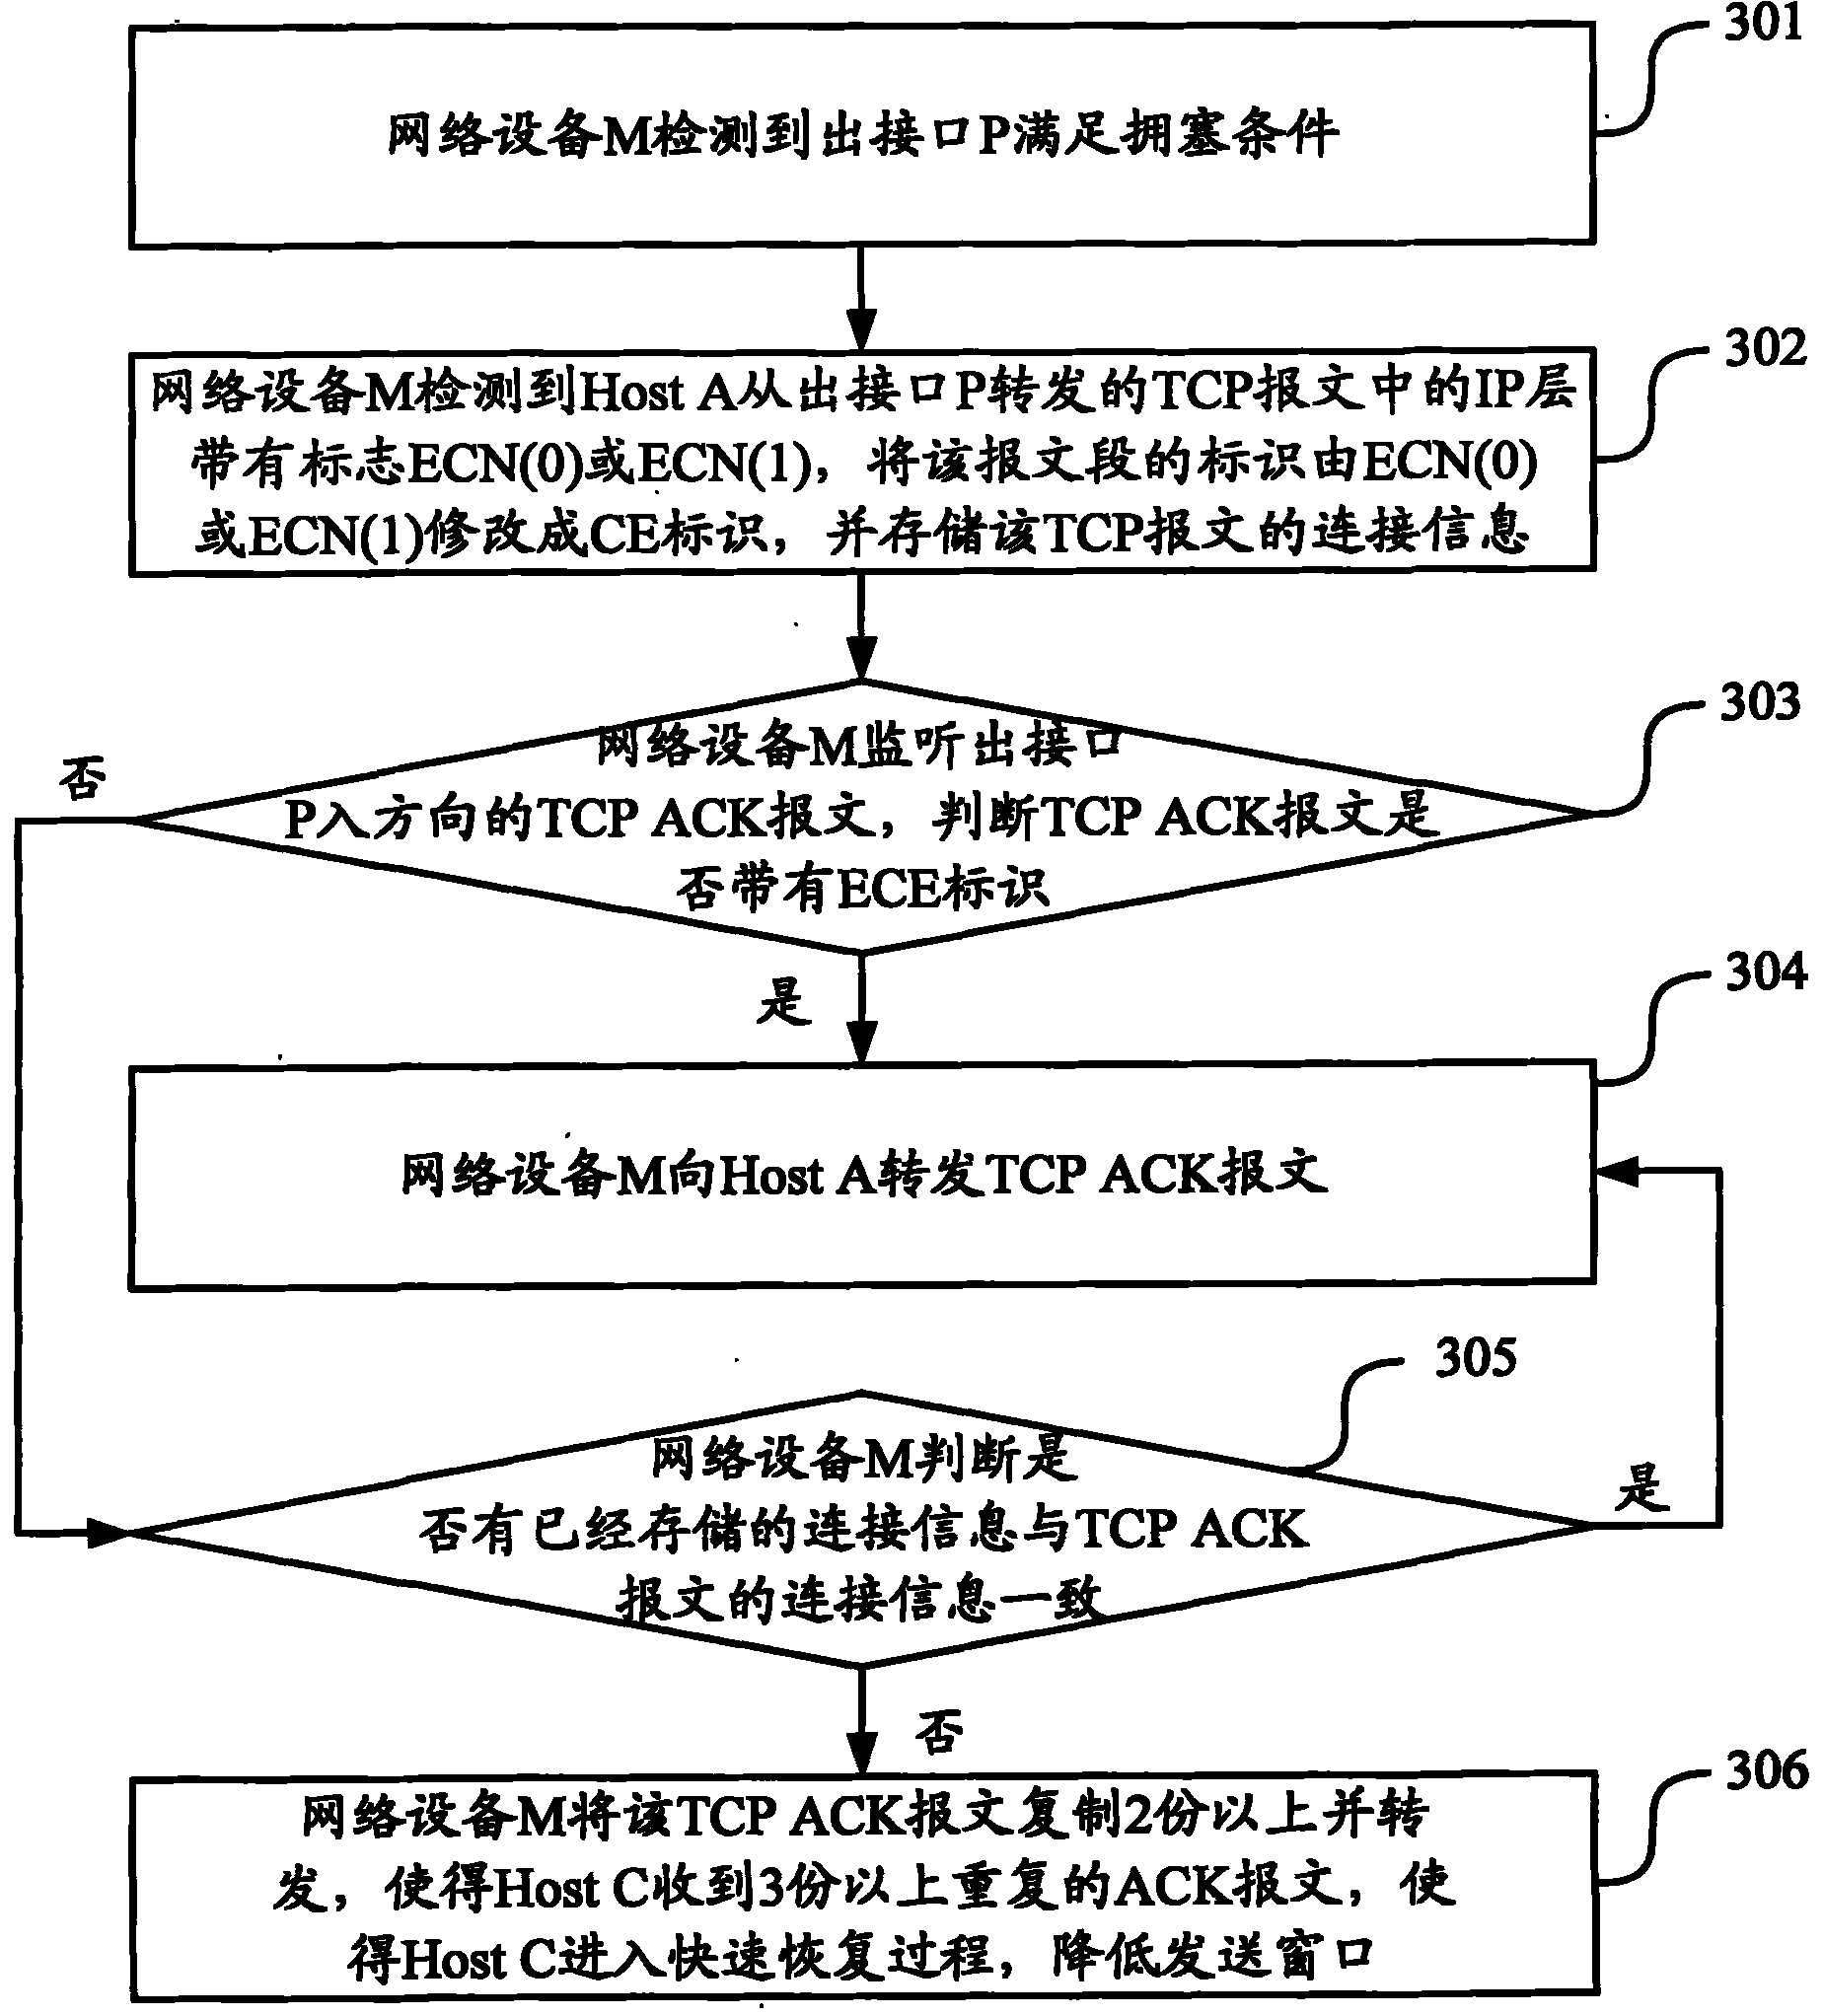 Message control method and device based on ECN (Explicit Congestion Notification) mechanism